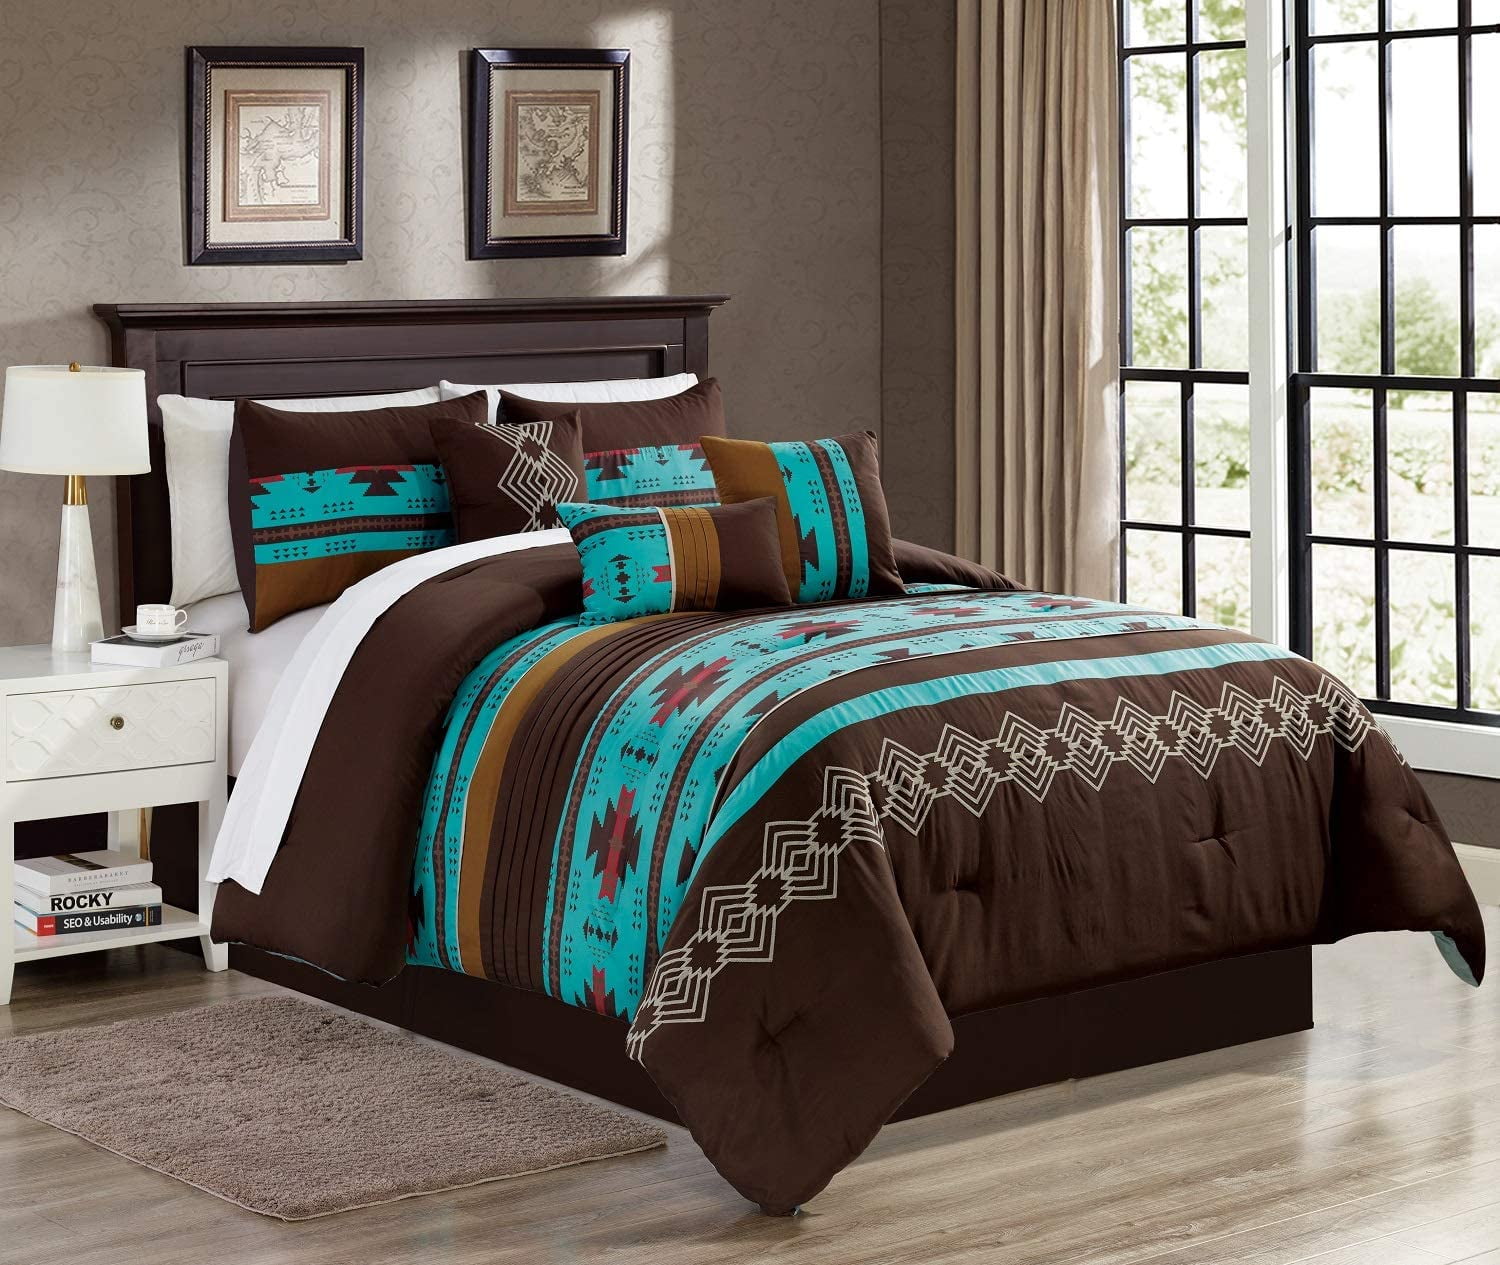 ~ ULTRA SOFT BROWN TAUPE TAN BEIGE STRIPE CABIN LODGE COZY COMFORTER SET Details about   ~ NEW 